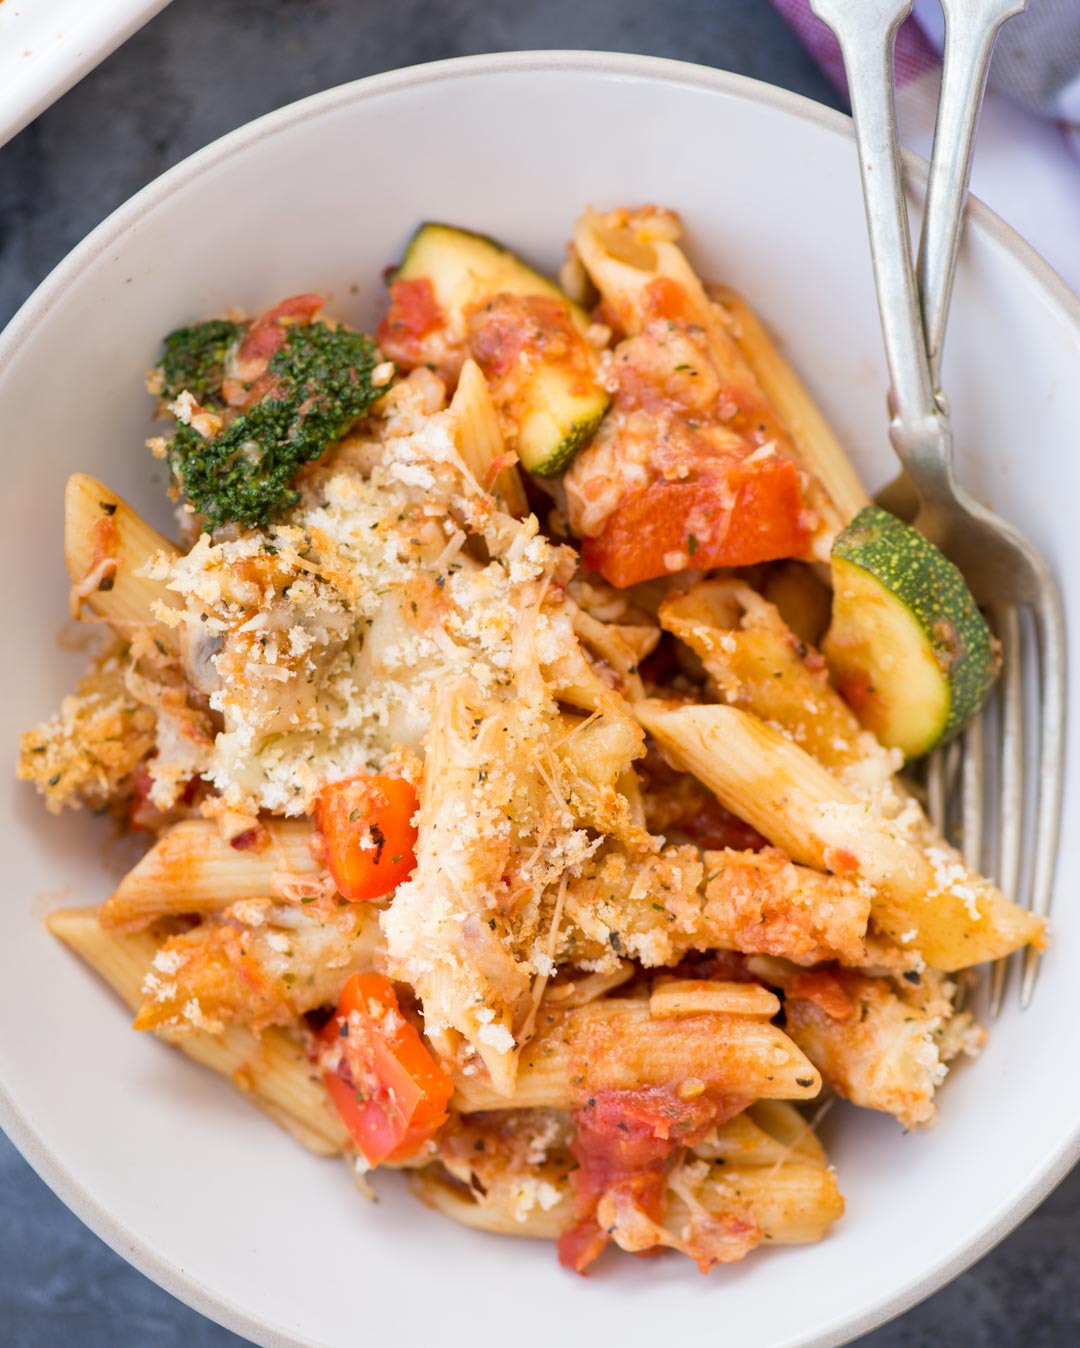 Vegetarian Noodle Casserole : Cheesy Tortellini with Veggies - Can't Stay Out of the Kitchen ...